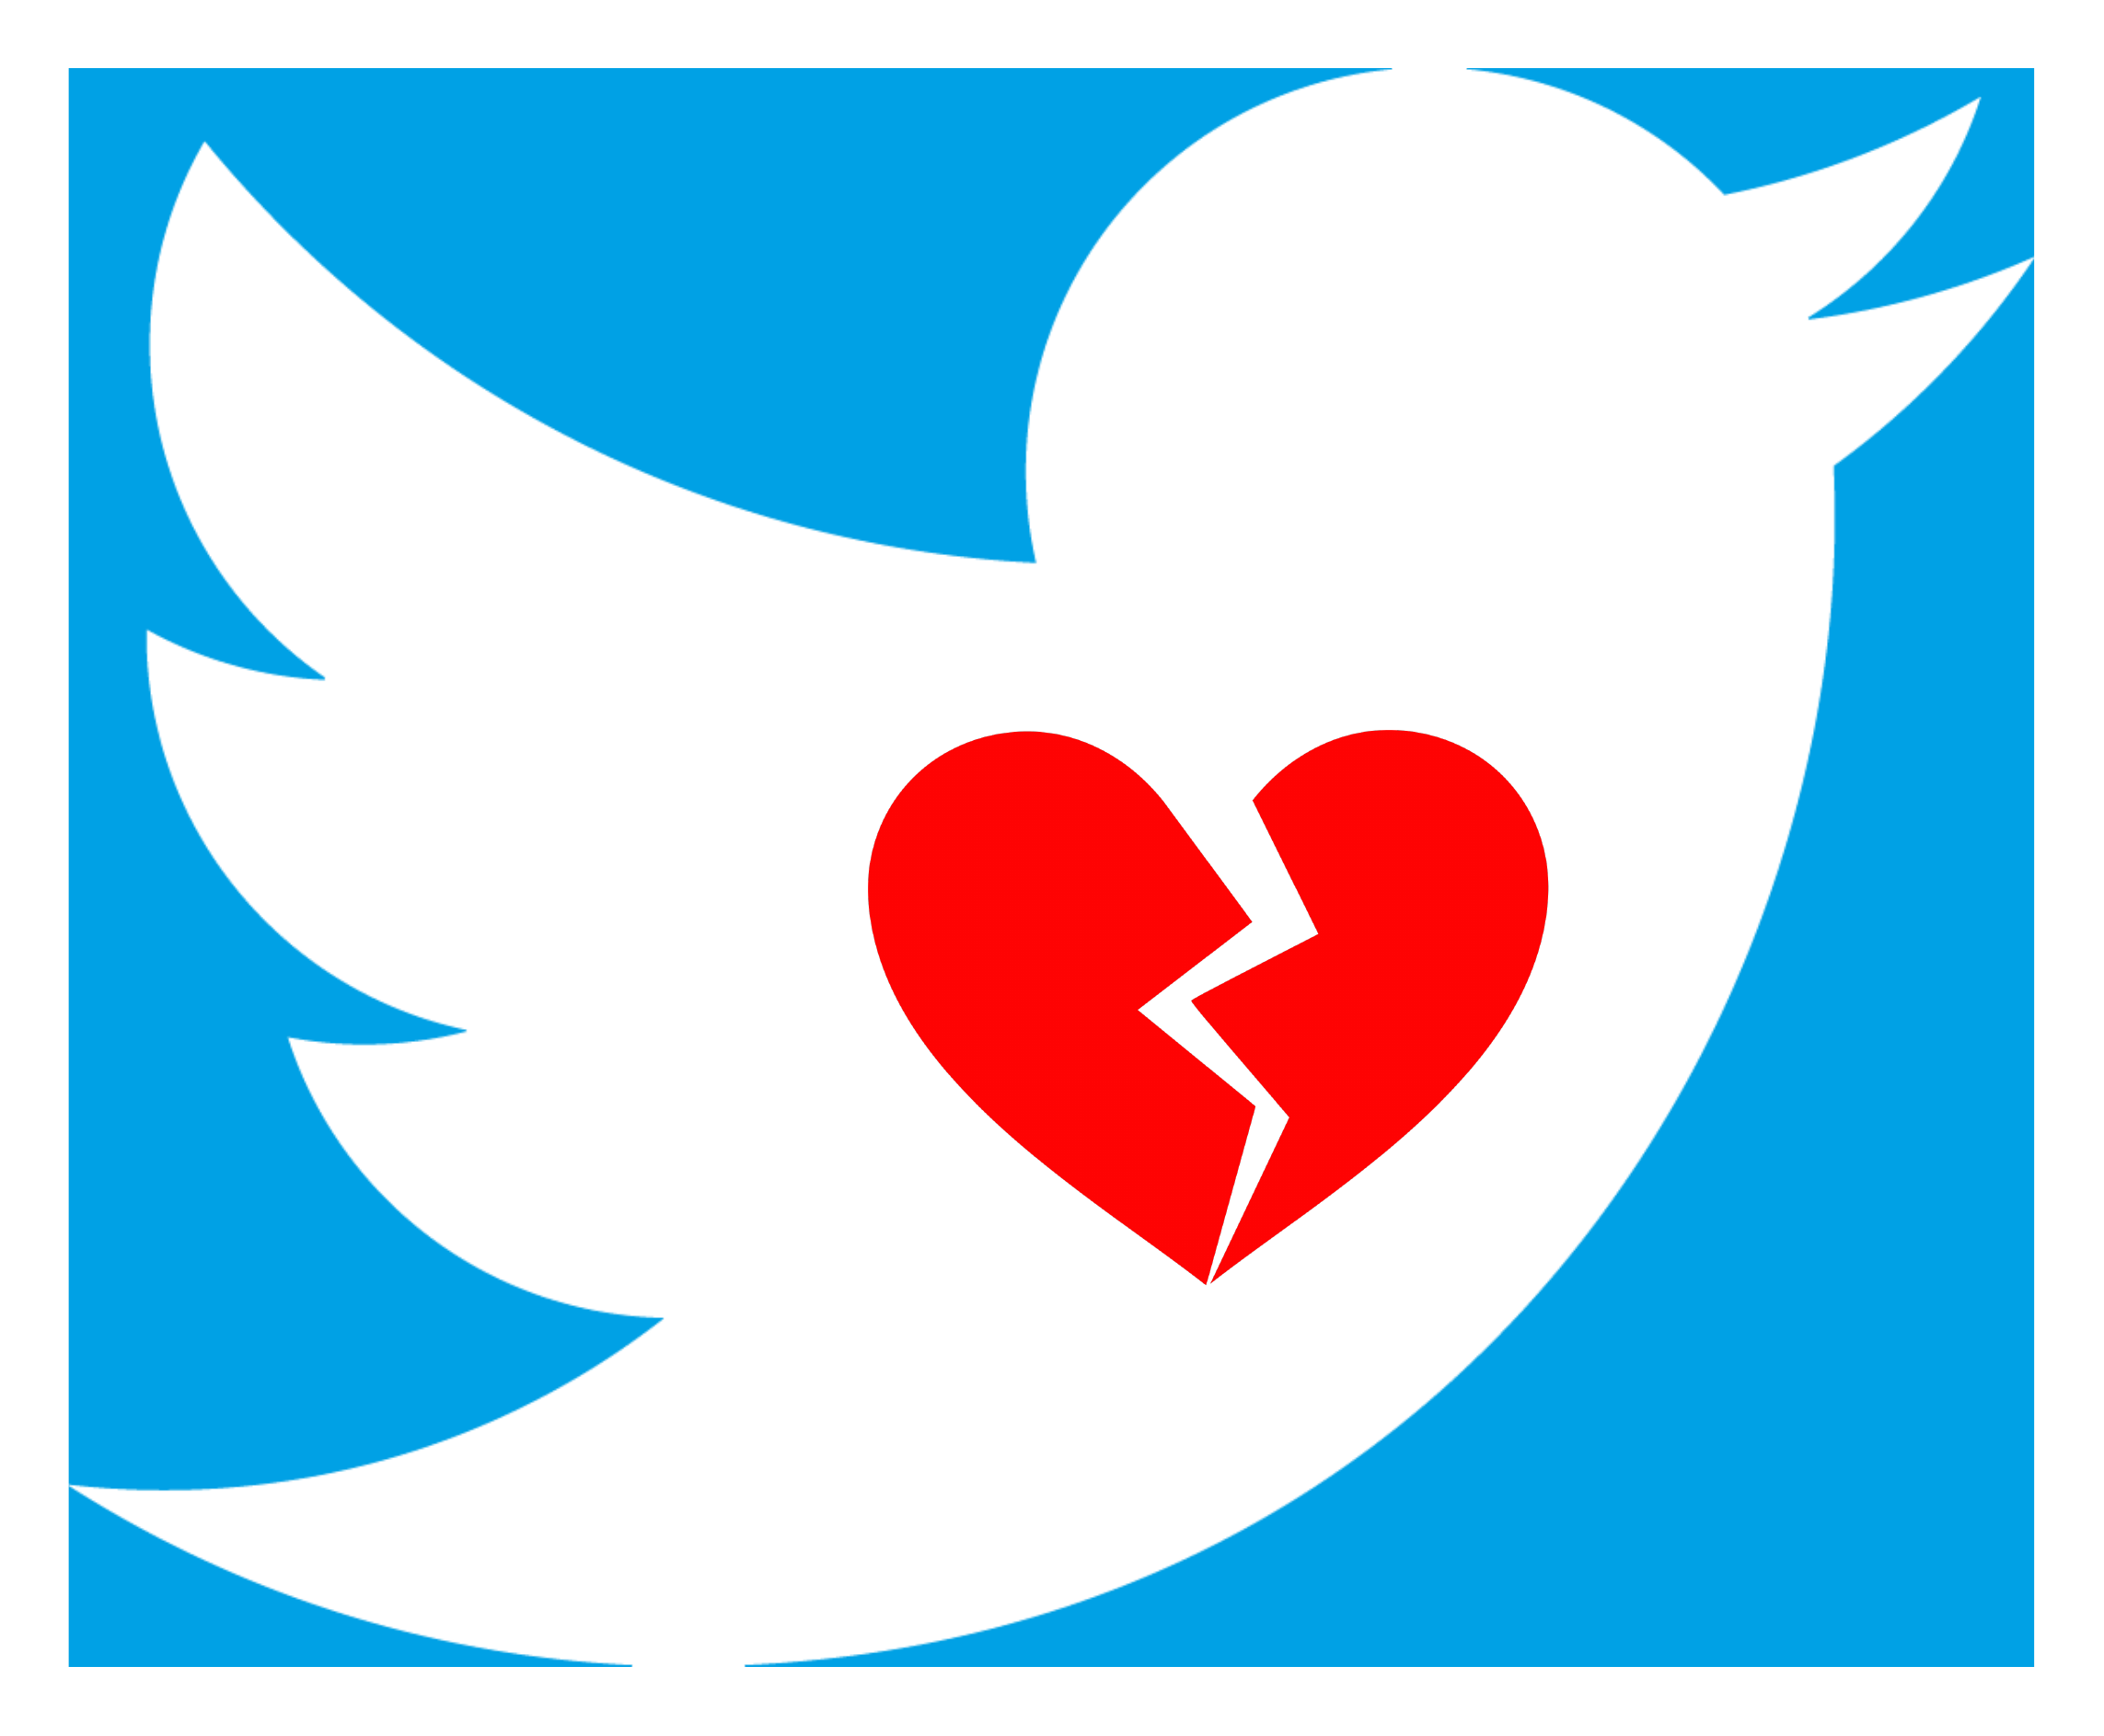 Twitter: A Love-Hate Relationship